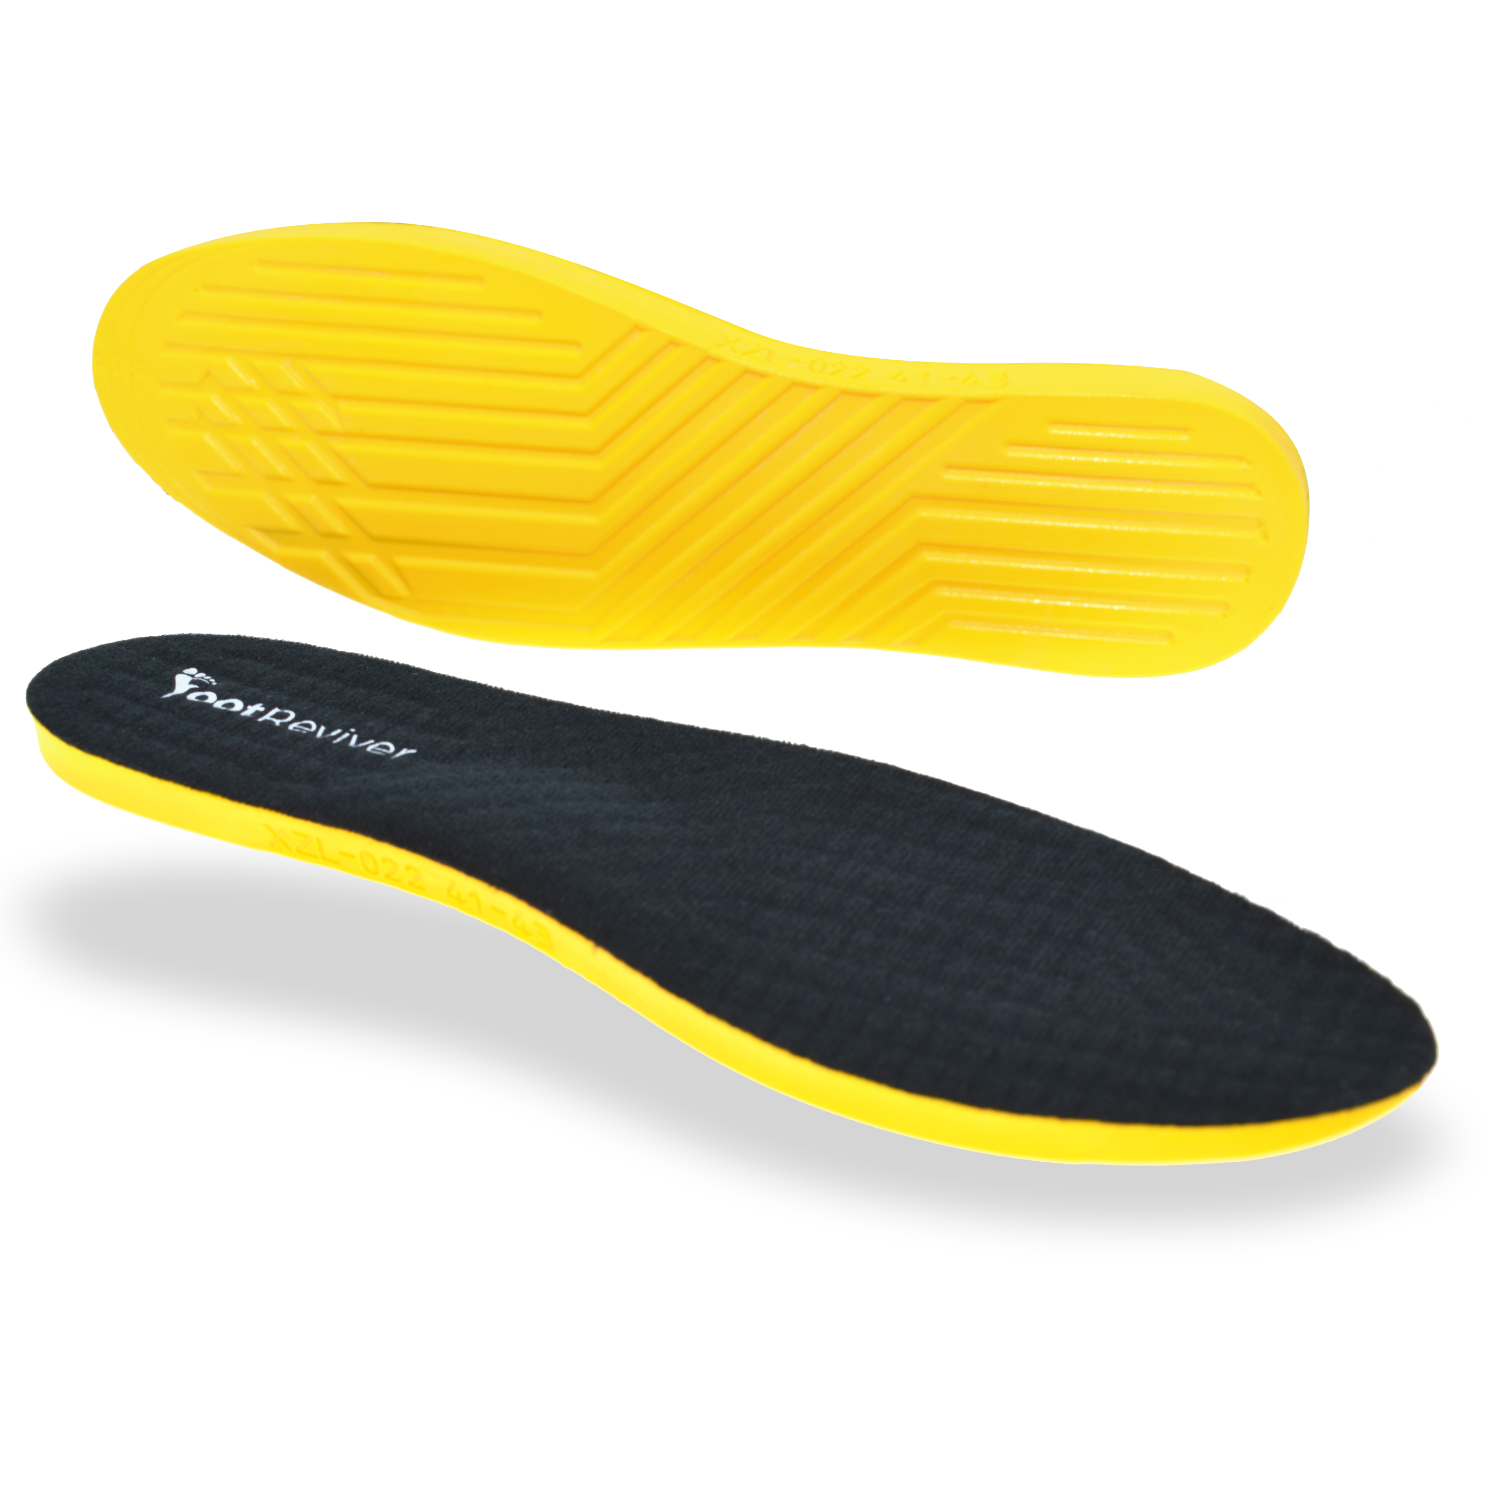 insoles to stop foot rolling inwards